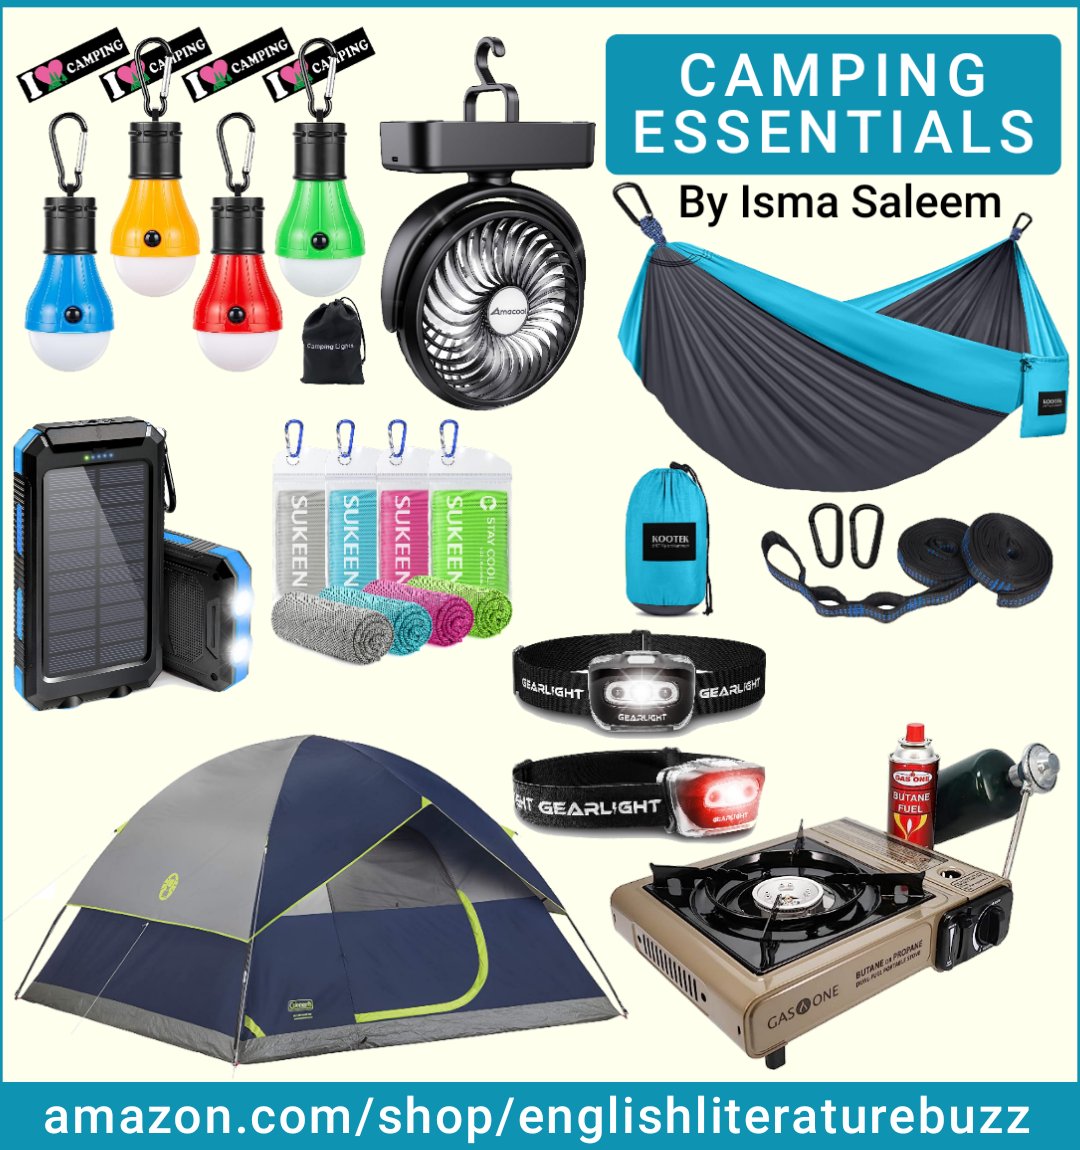 I've rounded uo some camping essentials from Amazon.
Just have a look
.
amzn.to/43I8u2Q
.
@amazon 
#Amazon #camping #campingessentials
#campinglife
#campingvibes #campingvibes #amazonfinds #founditonamazon #Ad